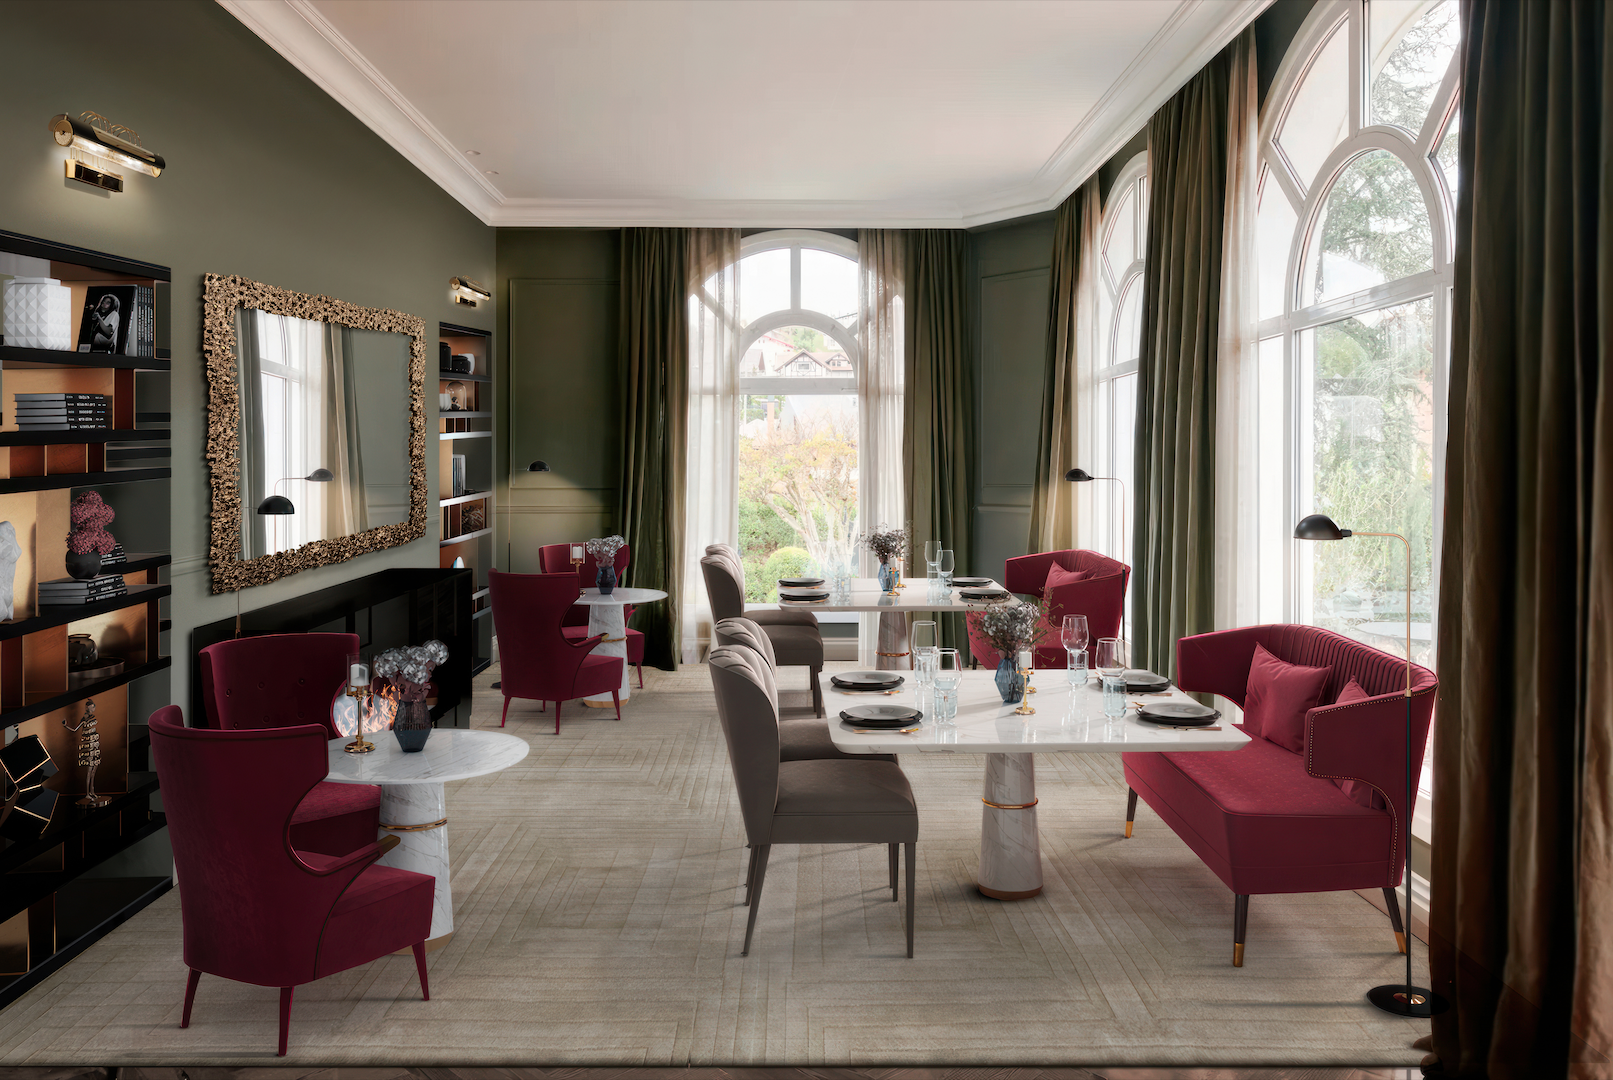 A Taste of Luxury: Boutique Hotel Breakfast Room with White Marble Tables and Upholstered Chairs - Home'Society